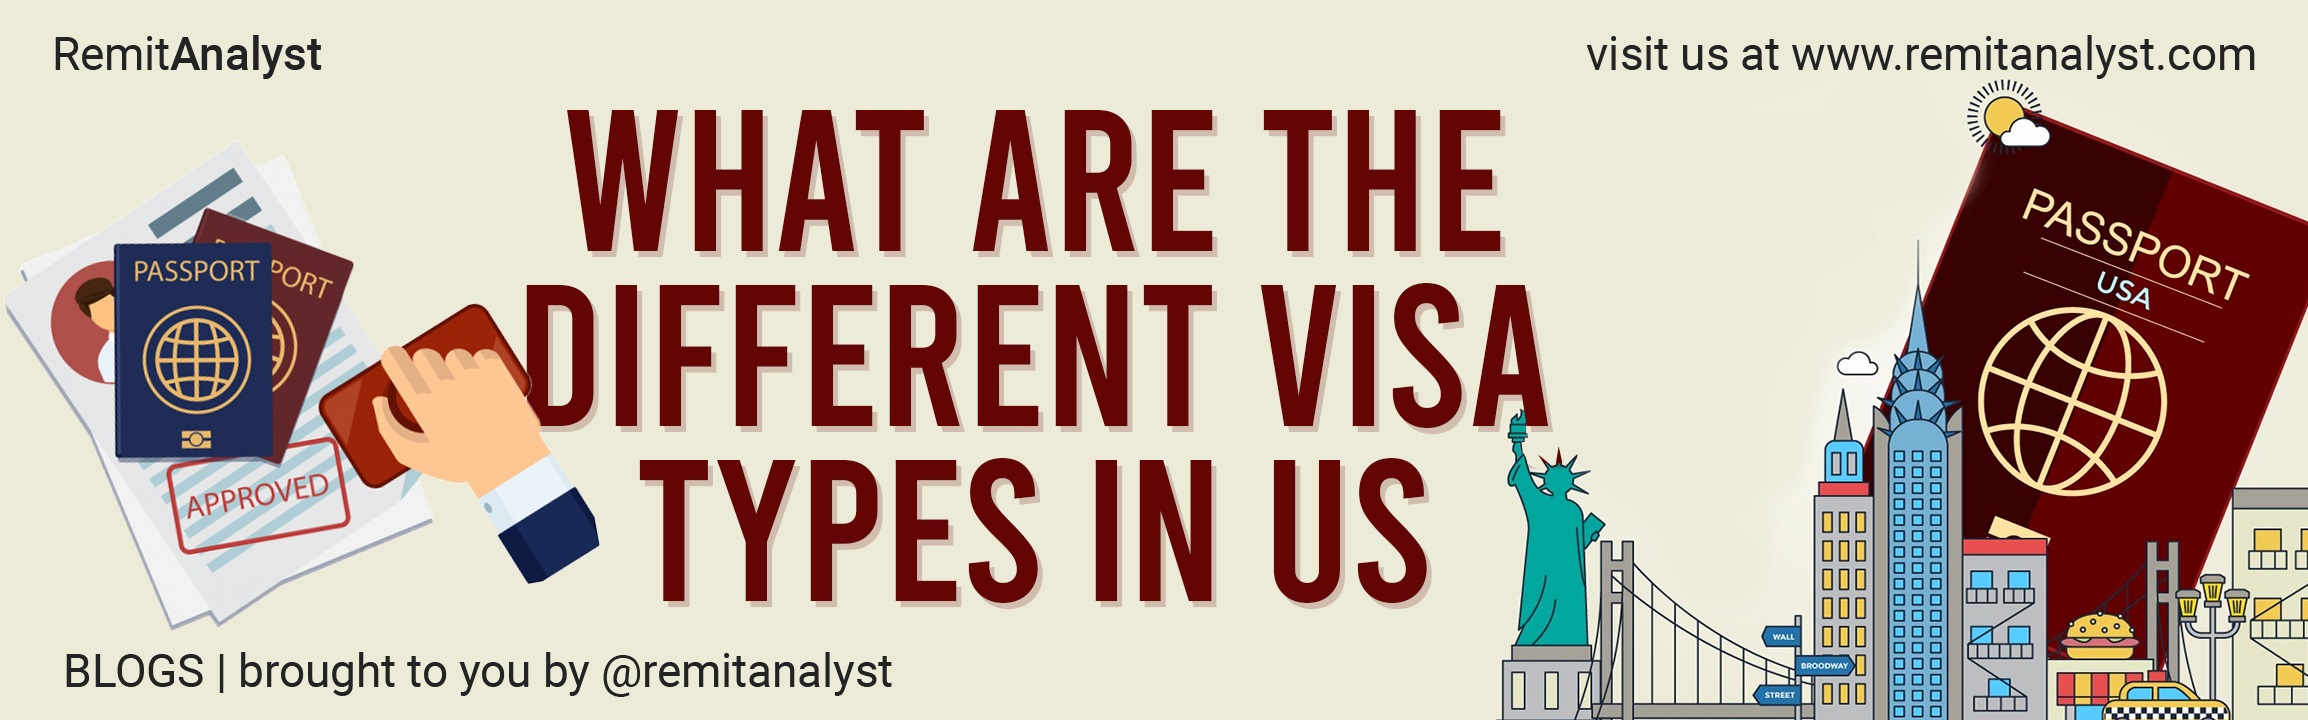 what-are-the-different-visa-types-in-us-title